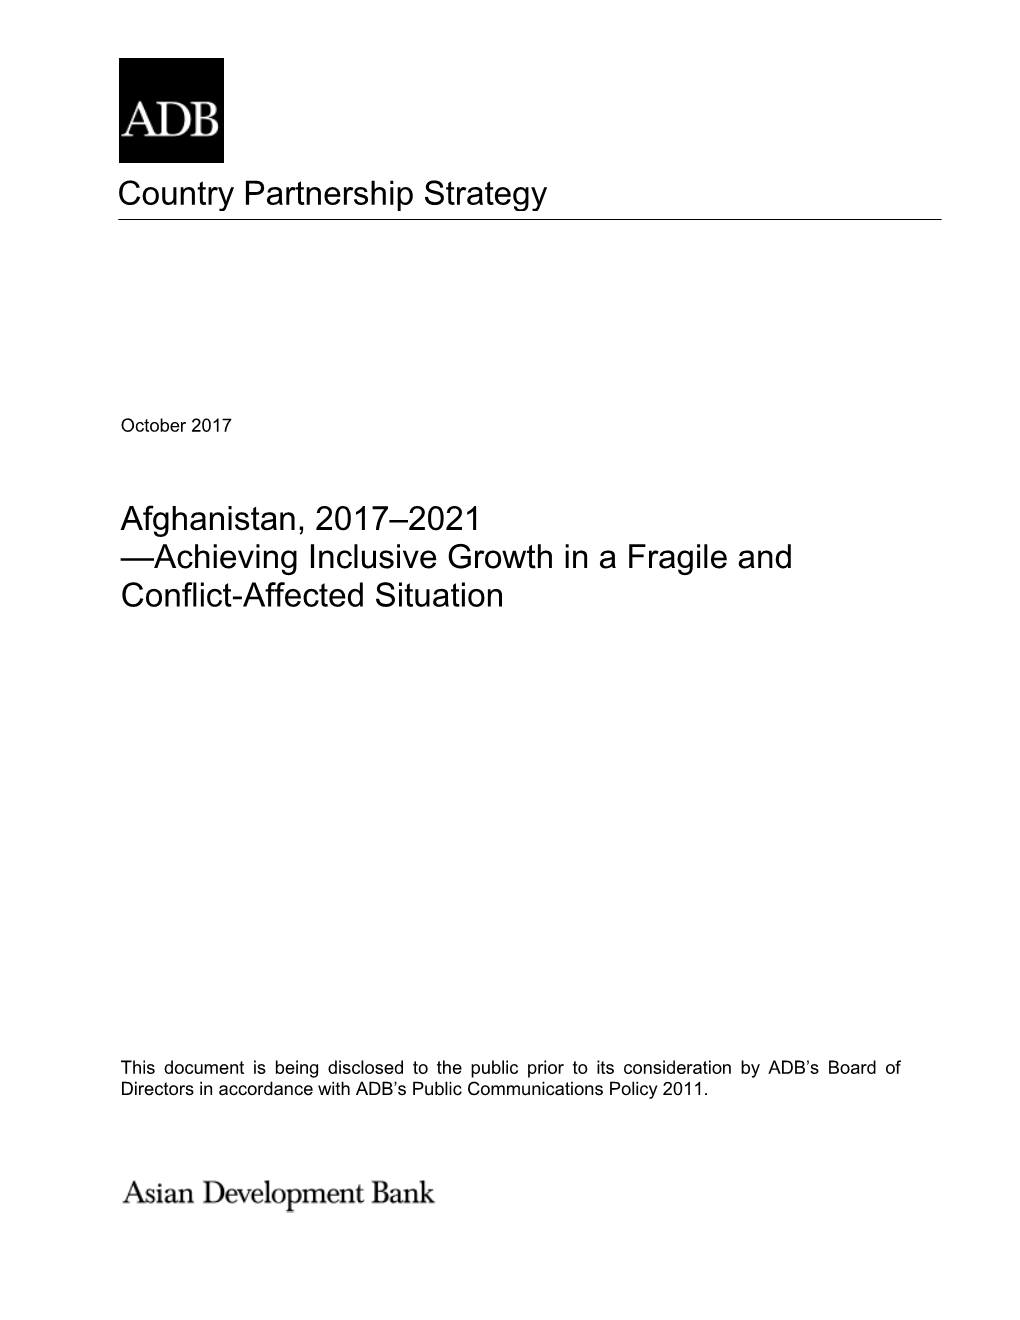 Afghanistan: Country Partnership Strategy (2017-2021)